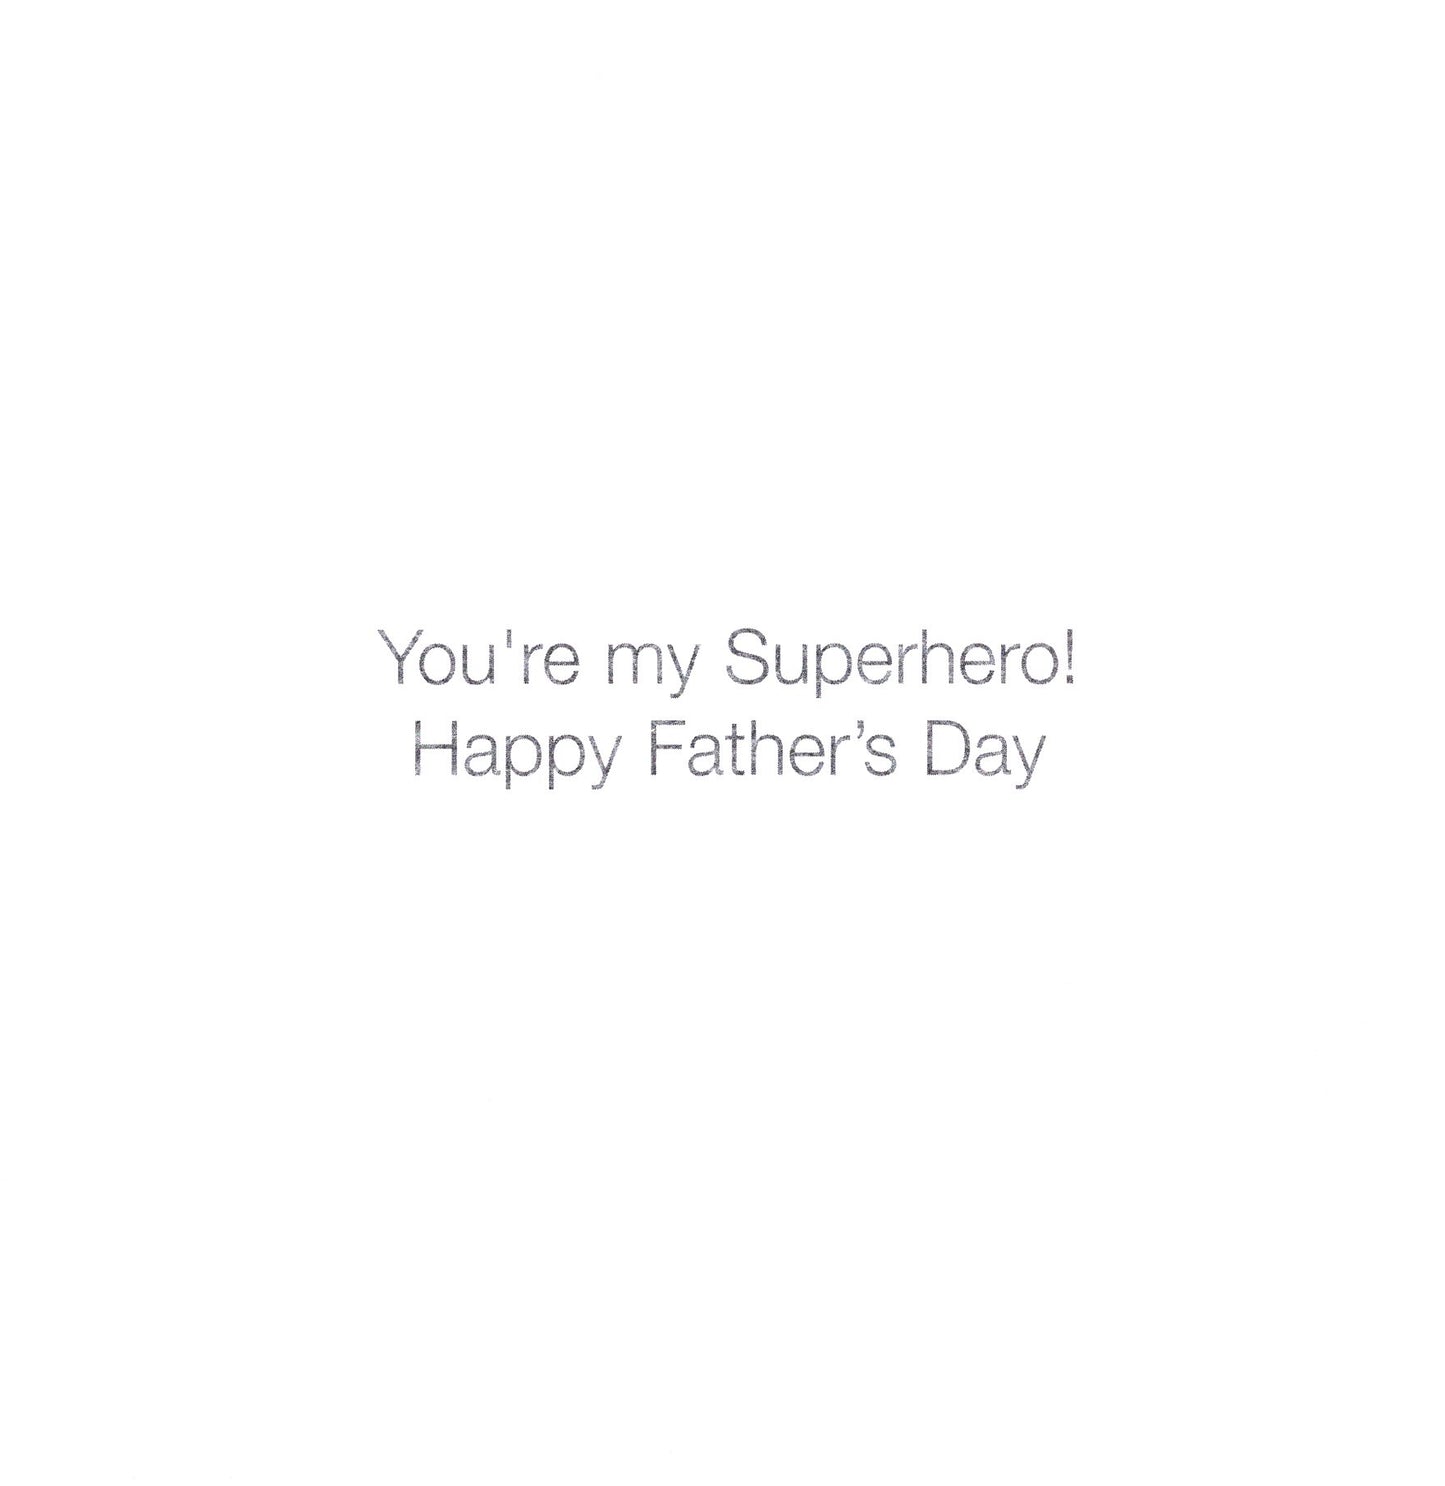 Superdad Father's Day Greeting Card